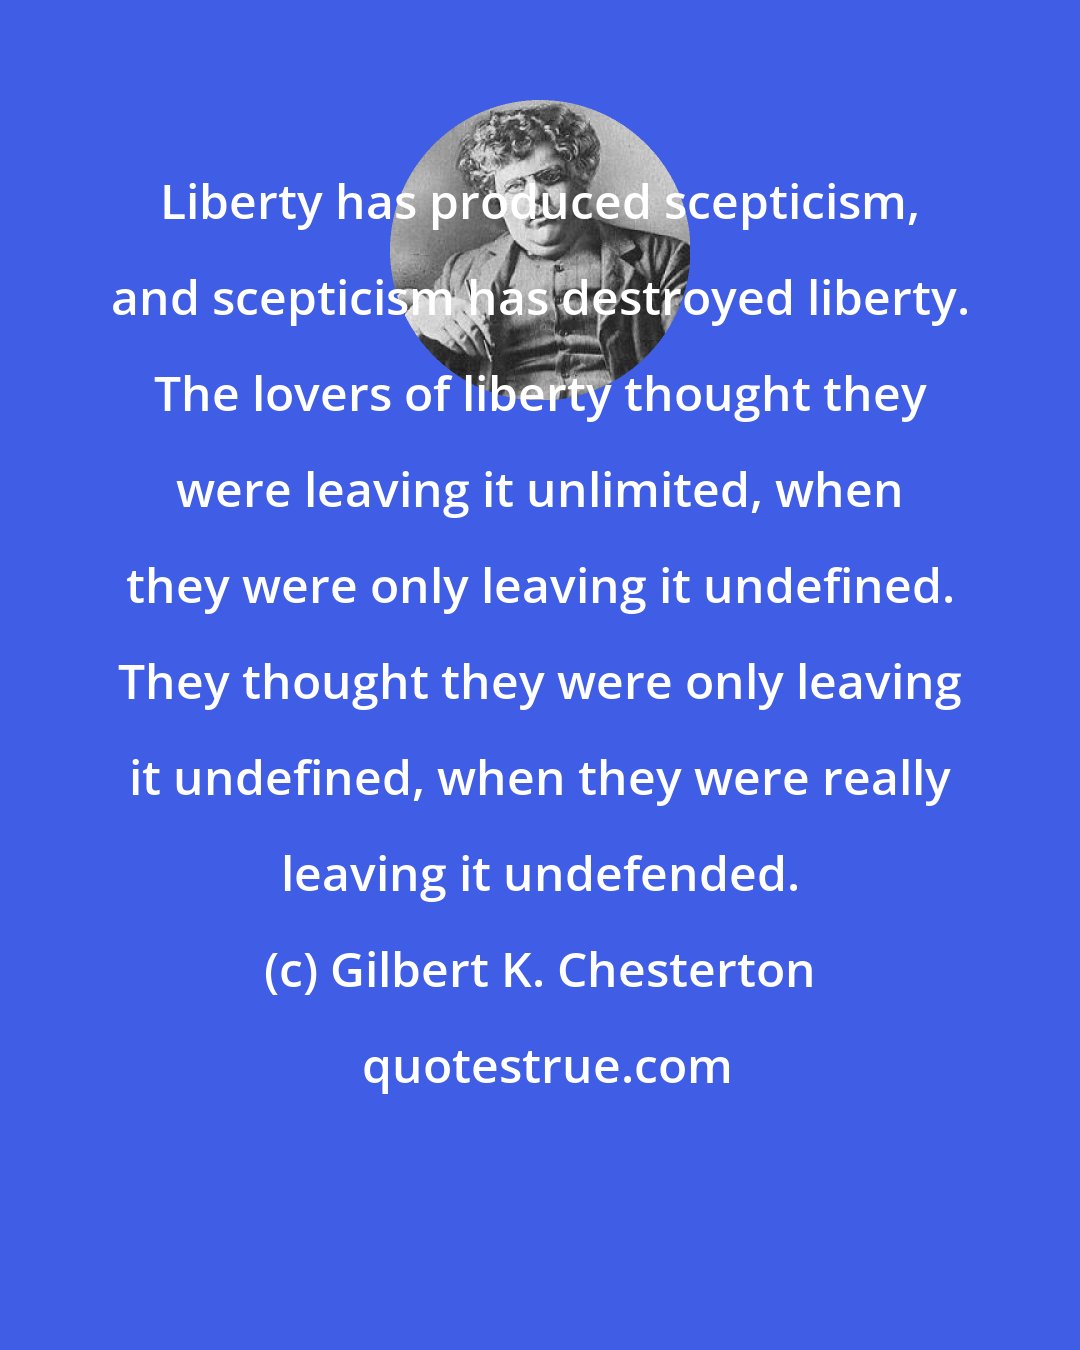 Gilbert K. Chesterton: Liberty has produced scepticism, and scepticism has destroyed liberty. The lovers of liberty thought they were leaving it unlimited, when they were only leaving it undefined. They thought they were only leaving it undefined, when they were really leaving it undefended.